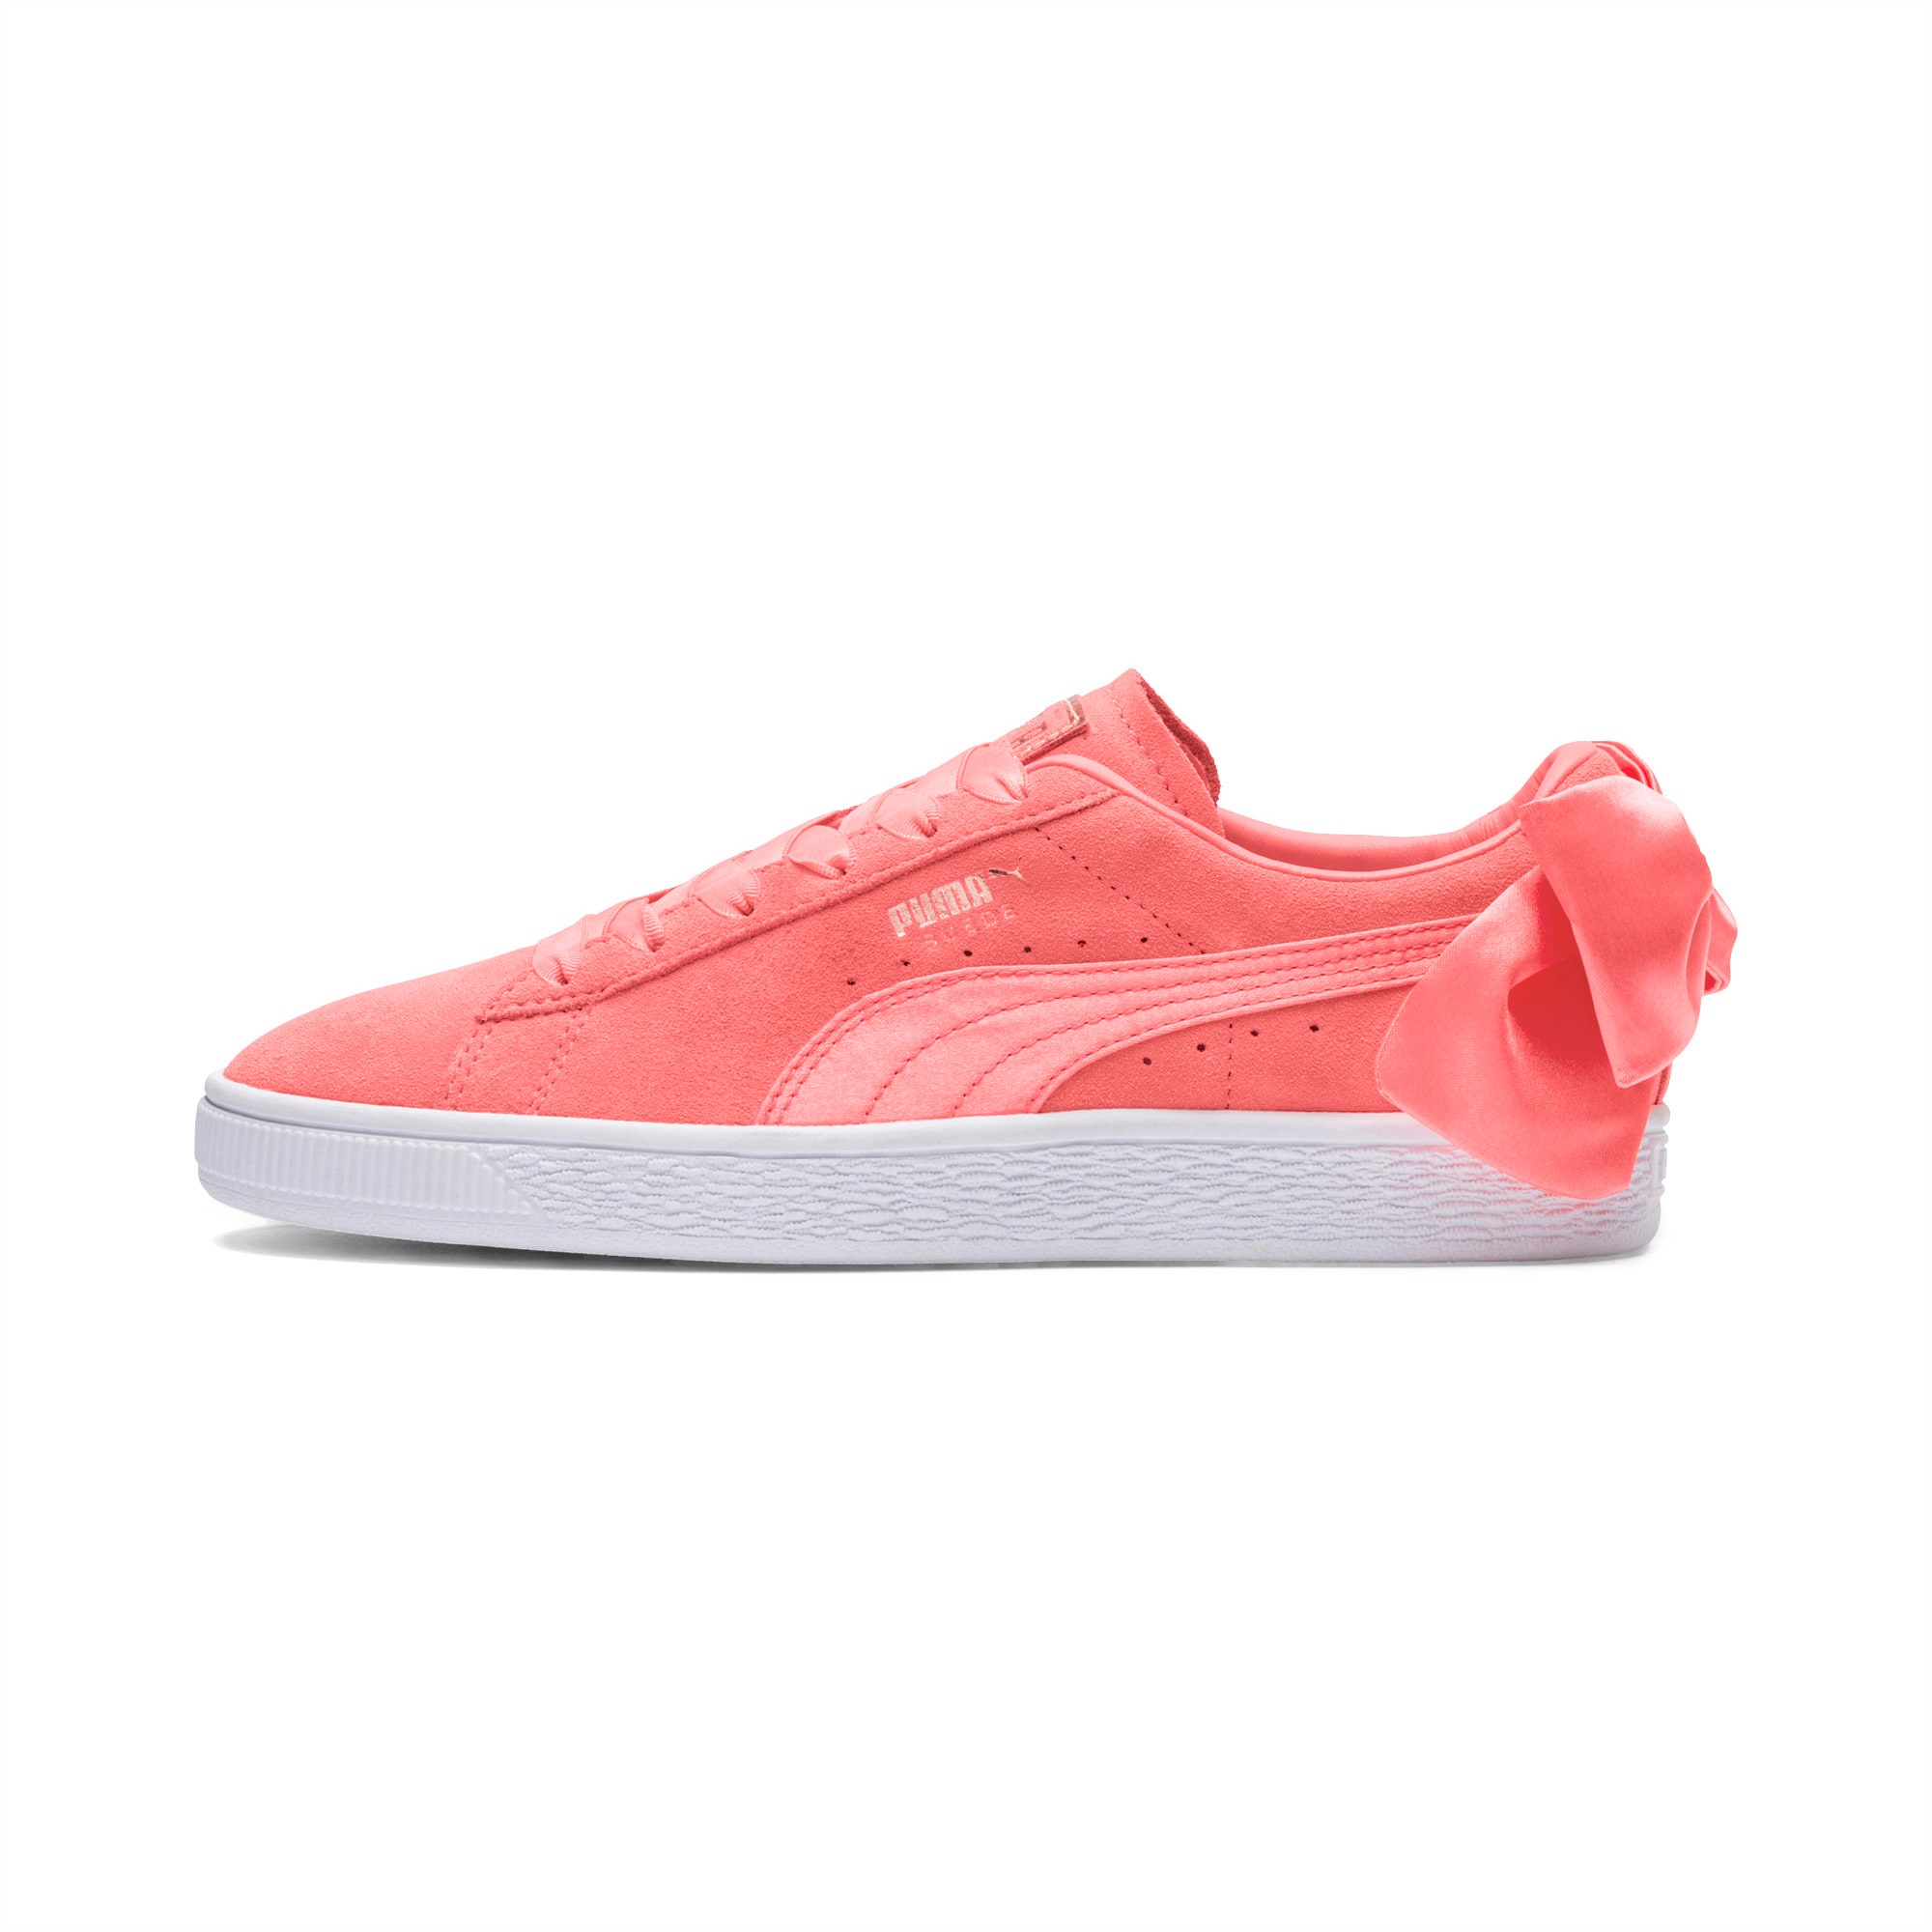 pink pumas with bow